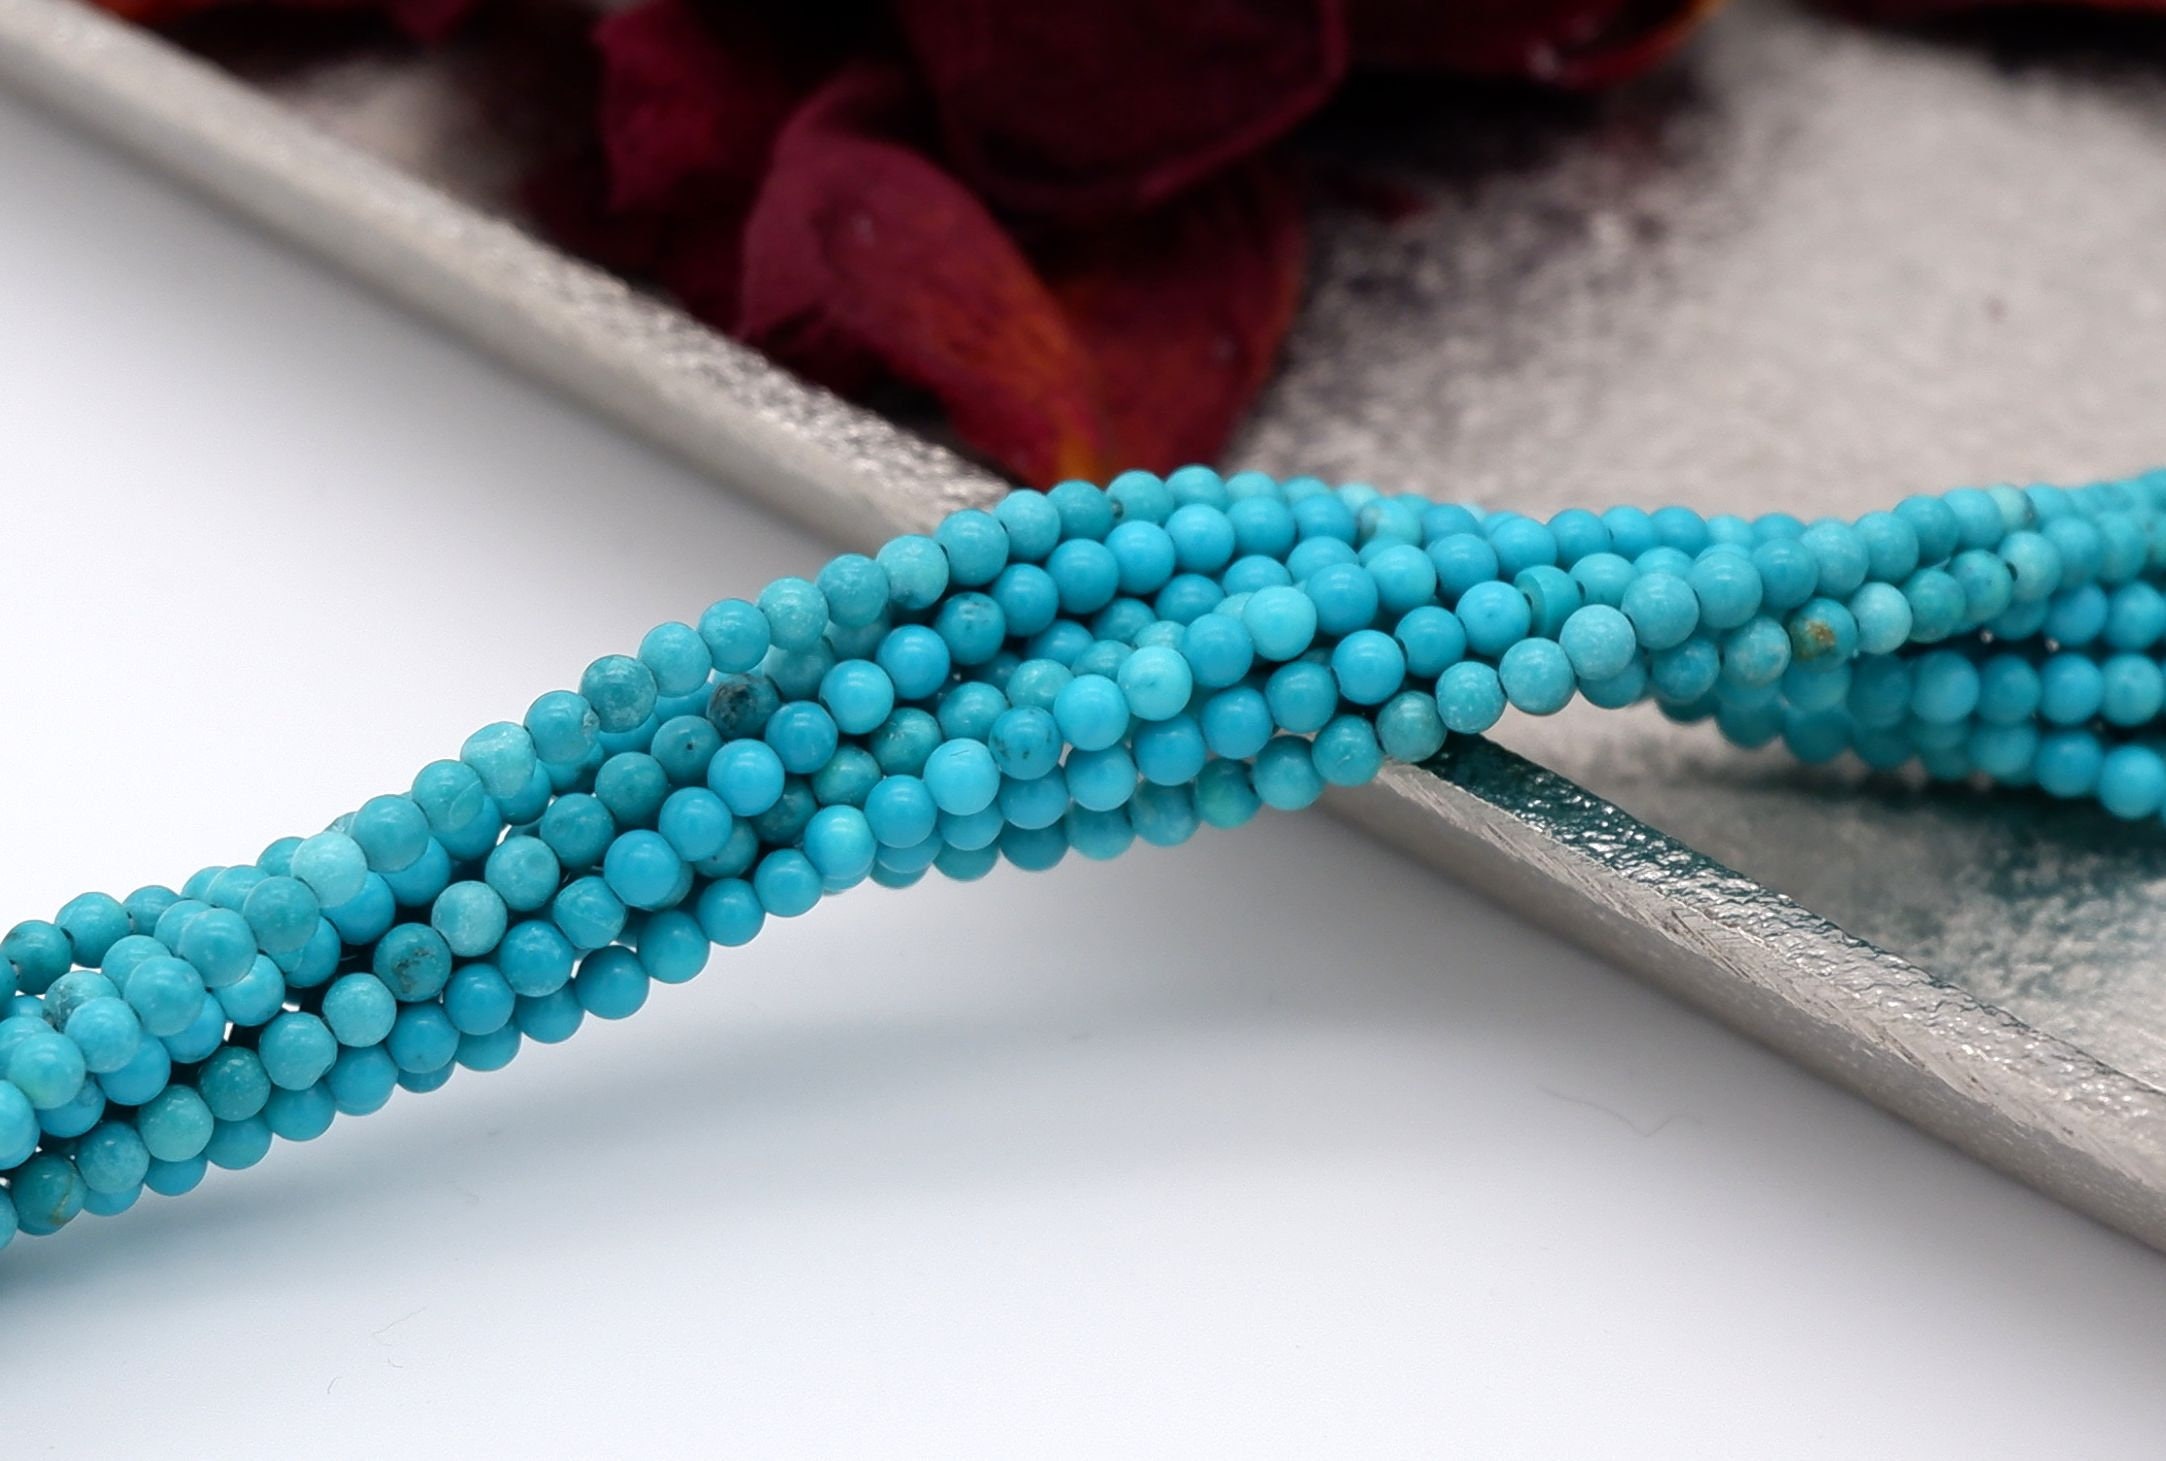 Natural Turquoise 2.5mm Faceted Round Beads Real Genuine Natural